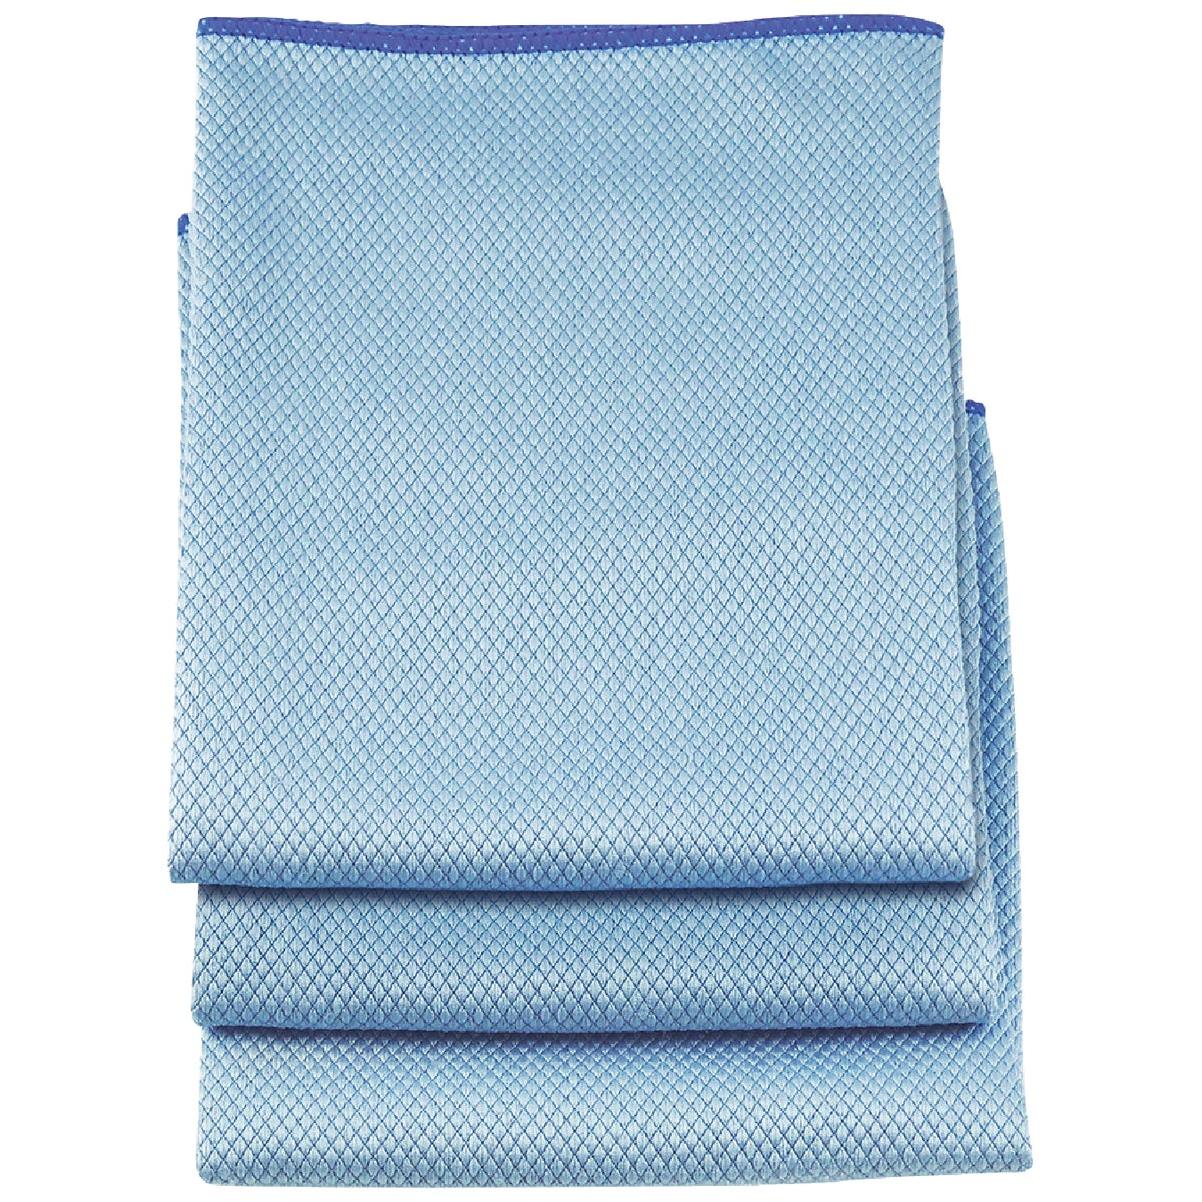 Trimaco SuperTuff 14 In. x 17 In. White Terry Cloth Towels (6-Pack